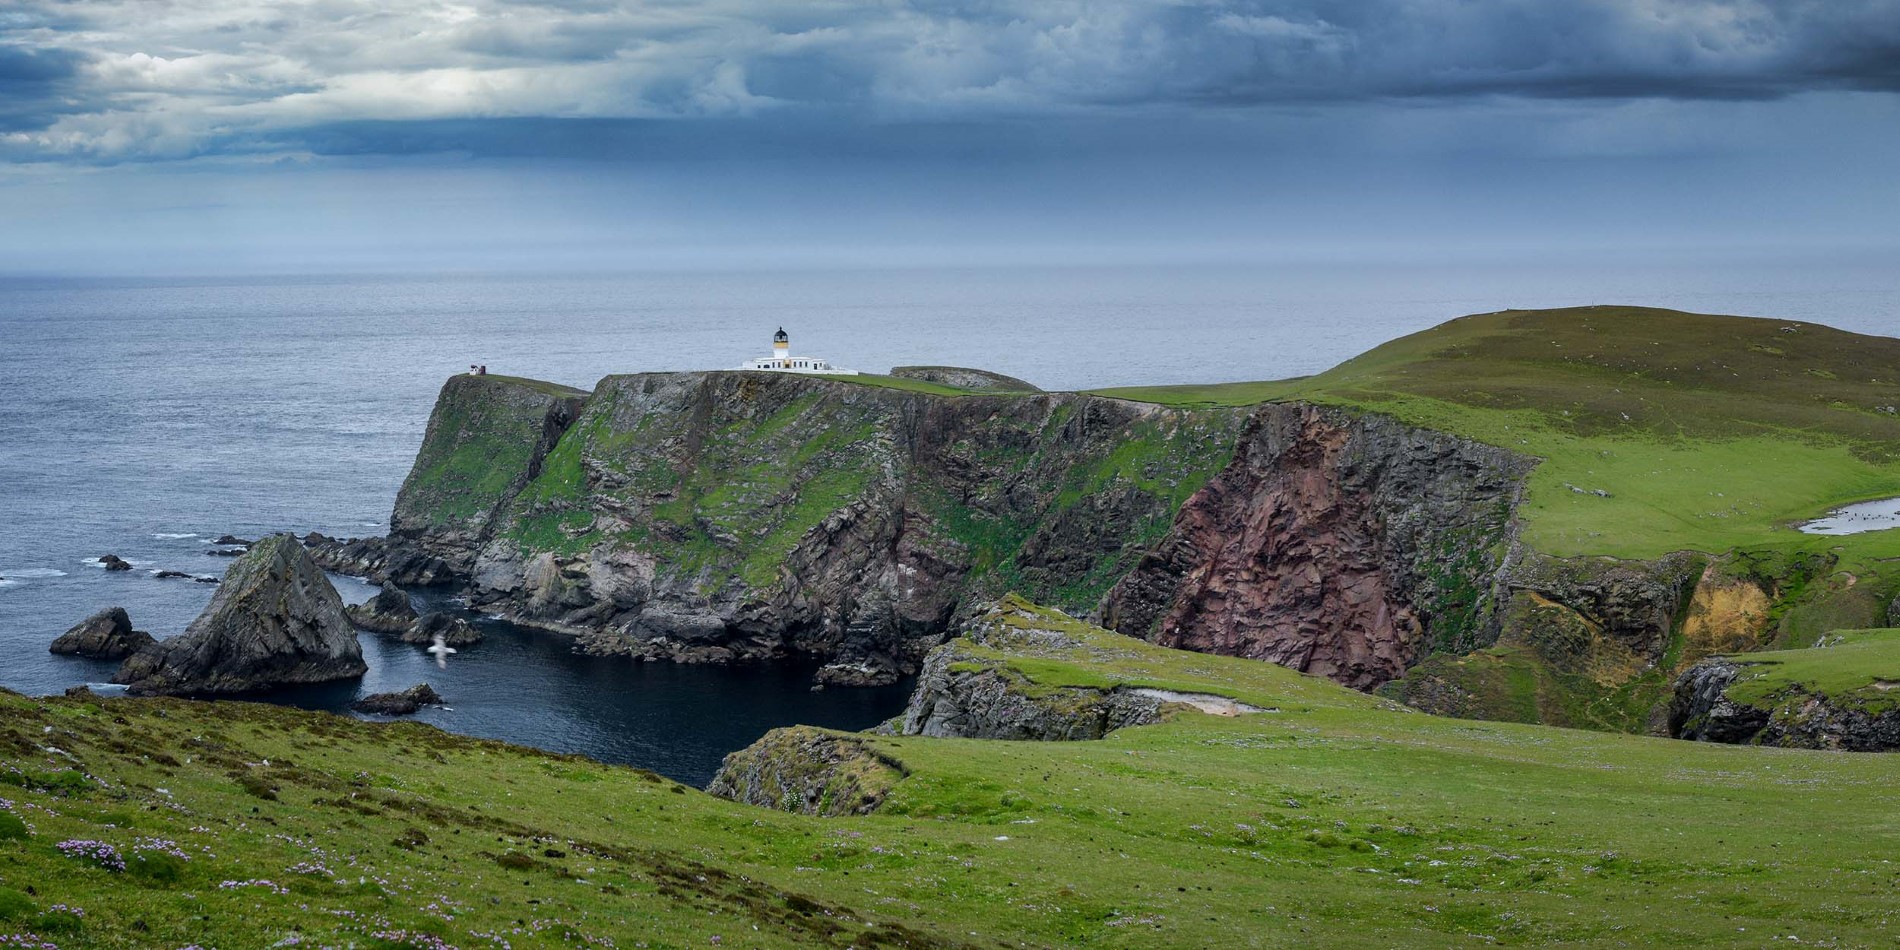 Cliffs, sea and a green landscape attract visitors to Fair Isle.